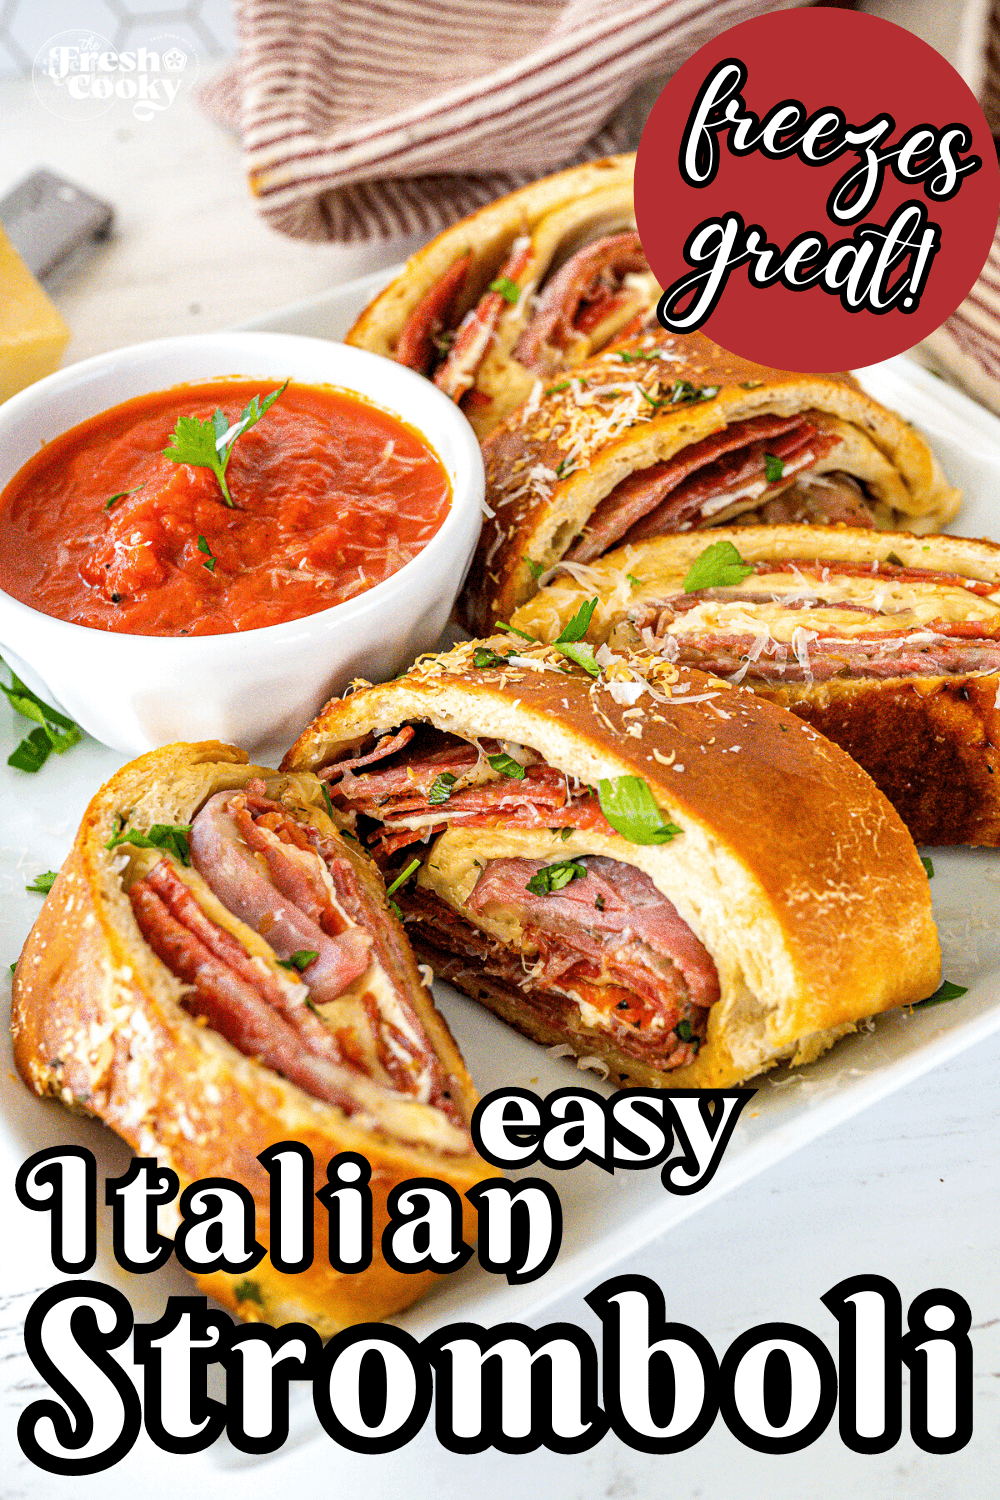 Italian Stromboli slices on a plate with marinara dipping sauce, to pin.